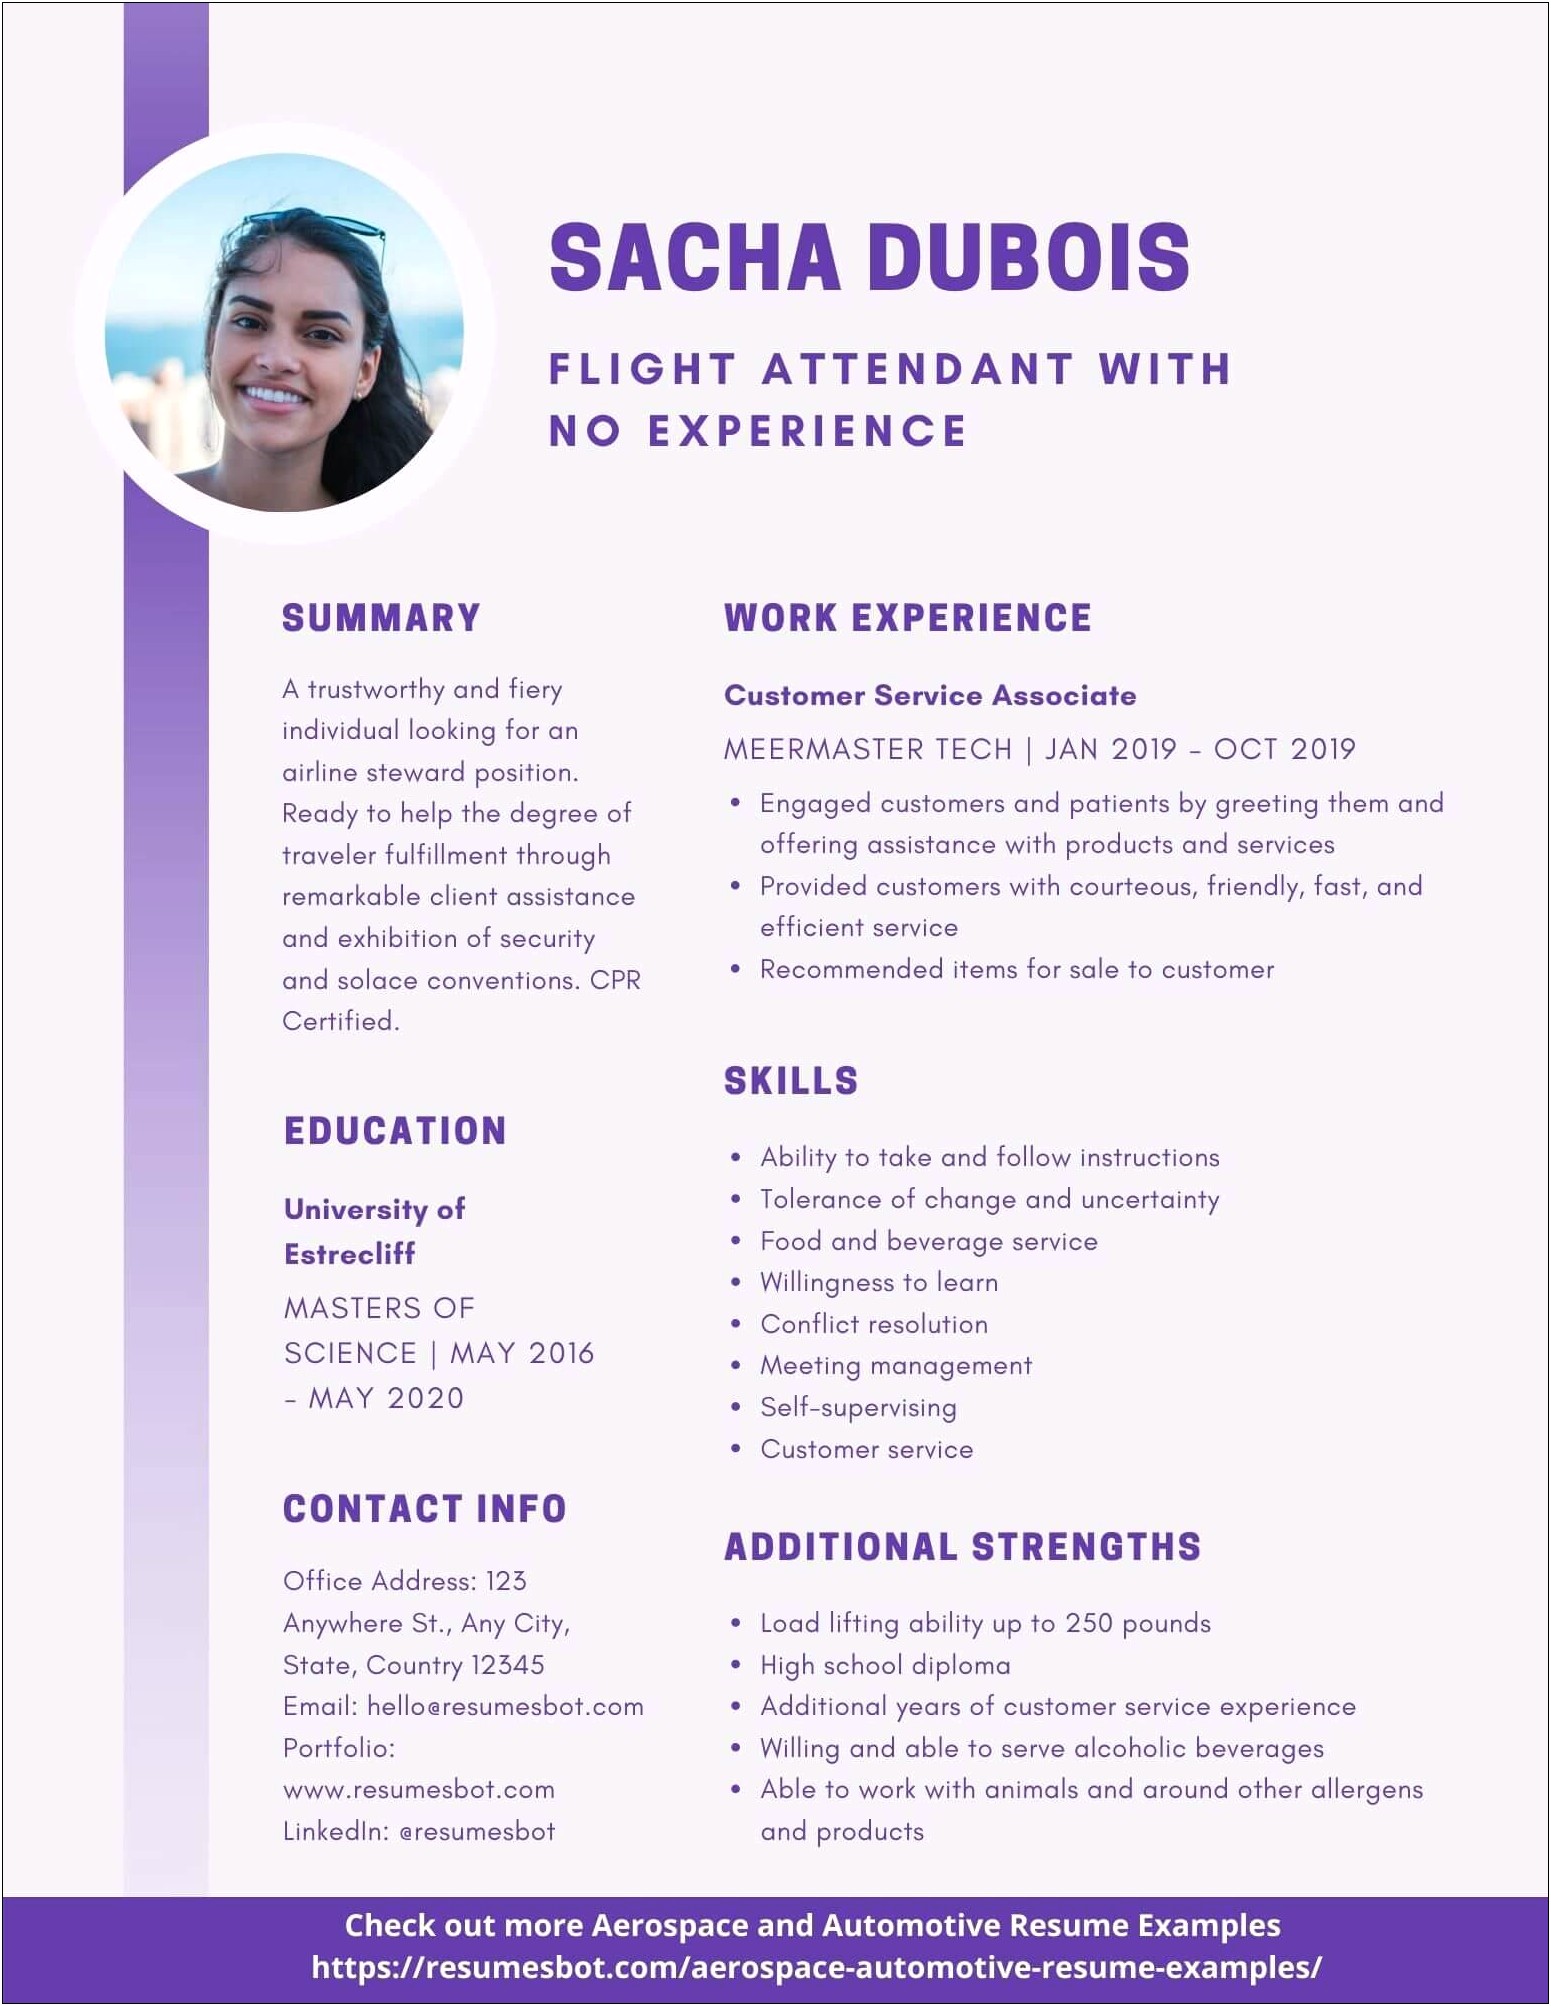 Resume For Flight Attendant With No Experience Sample